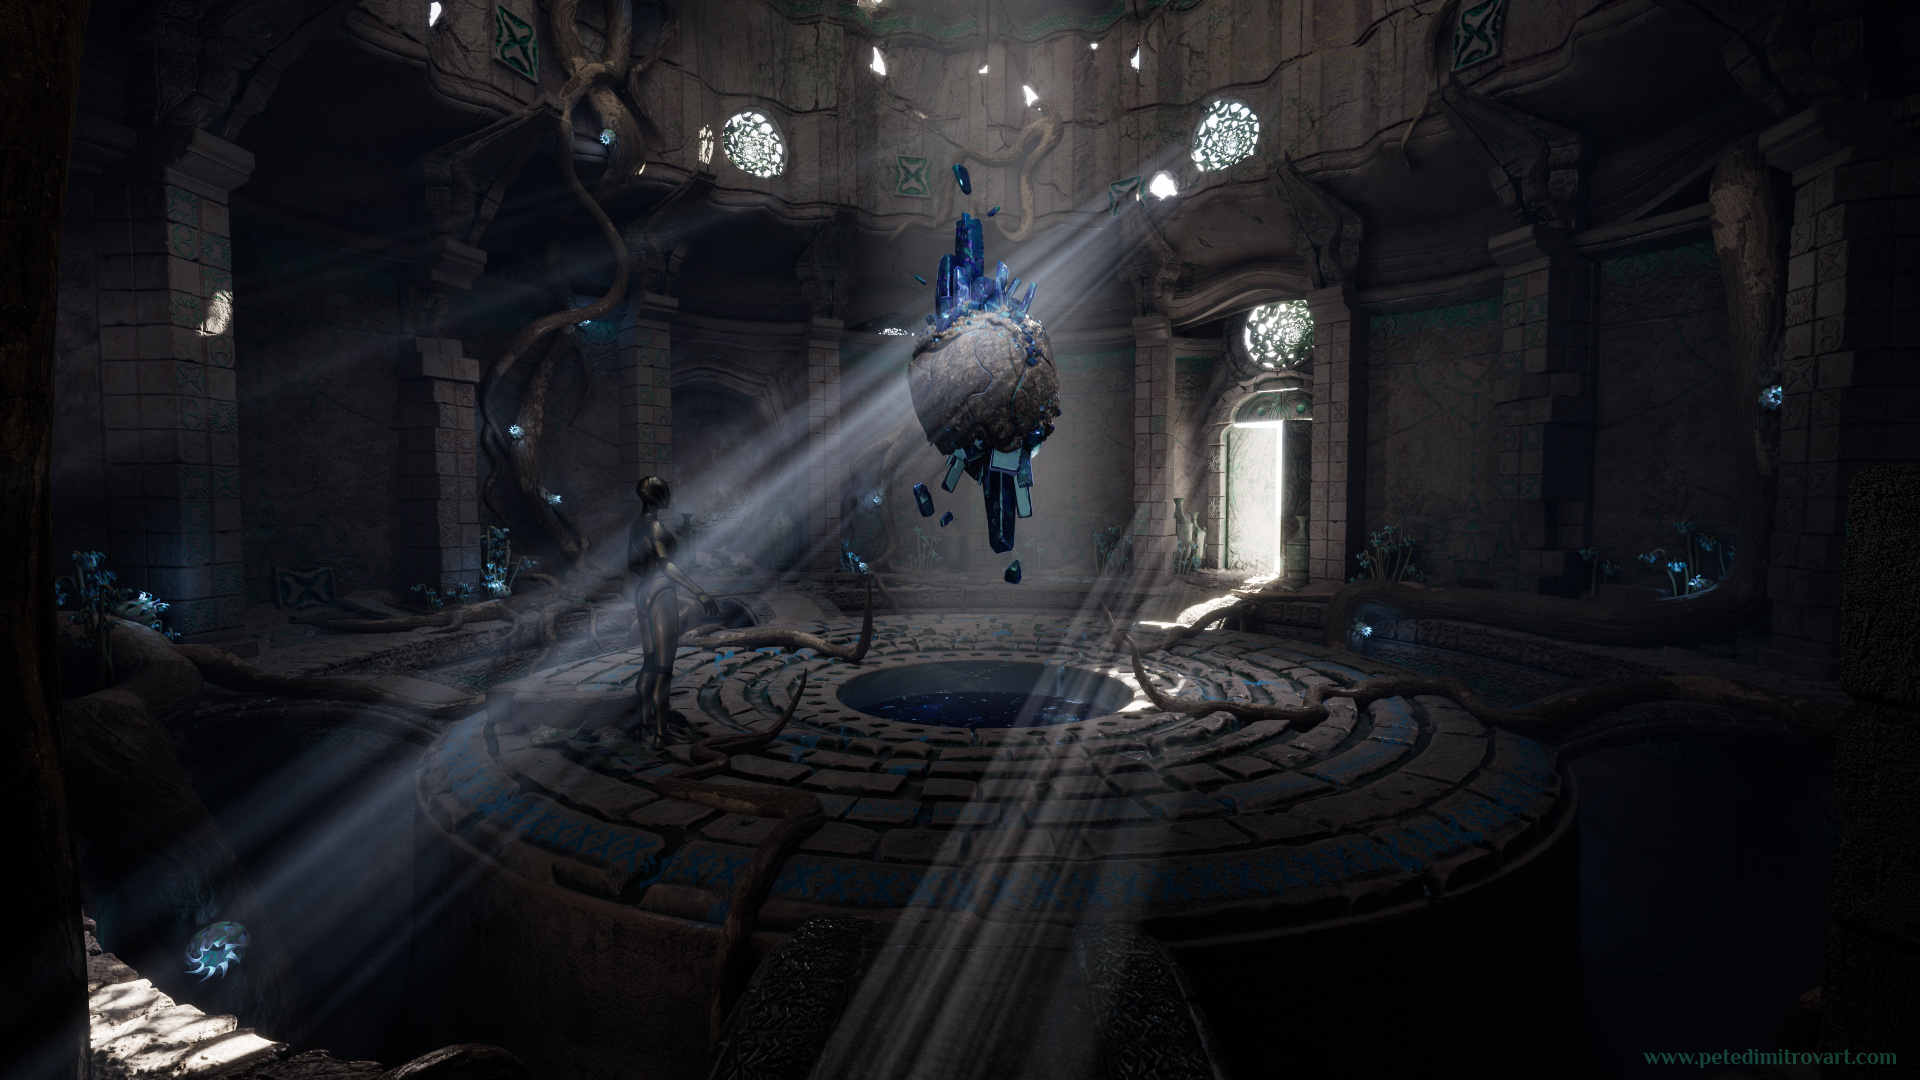 Another UE5 screenshot. This time its the main camera angle where to the right is the ajar door spilling daylight in an otherwise dark interior space. In the middle, above the circular platform, a crystal floats. Beneath it the basin is empty and there is no VFX yet. The roots crawling around the walls have pod-like, white flowers.